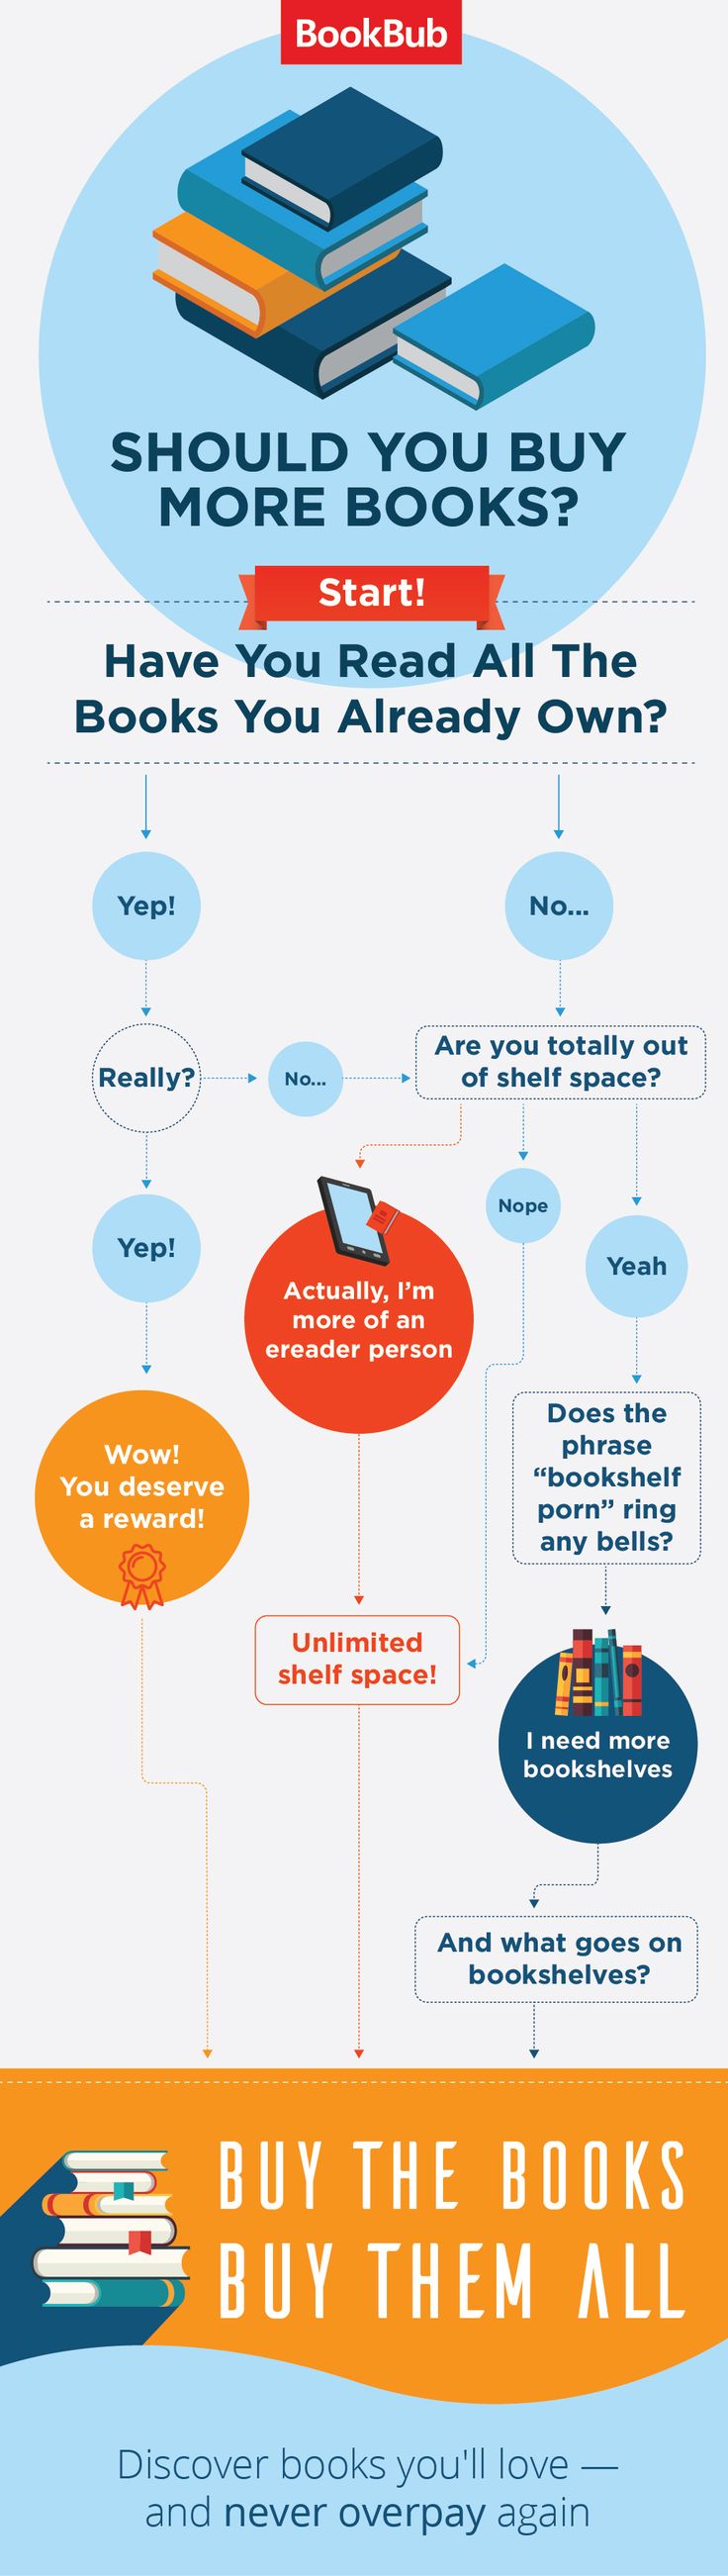 Should-I-buy-more-books-infographic[1]